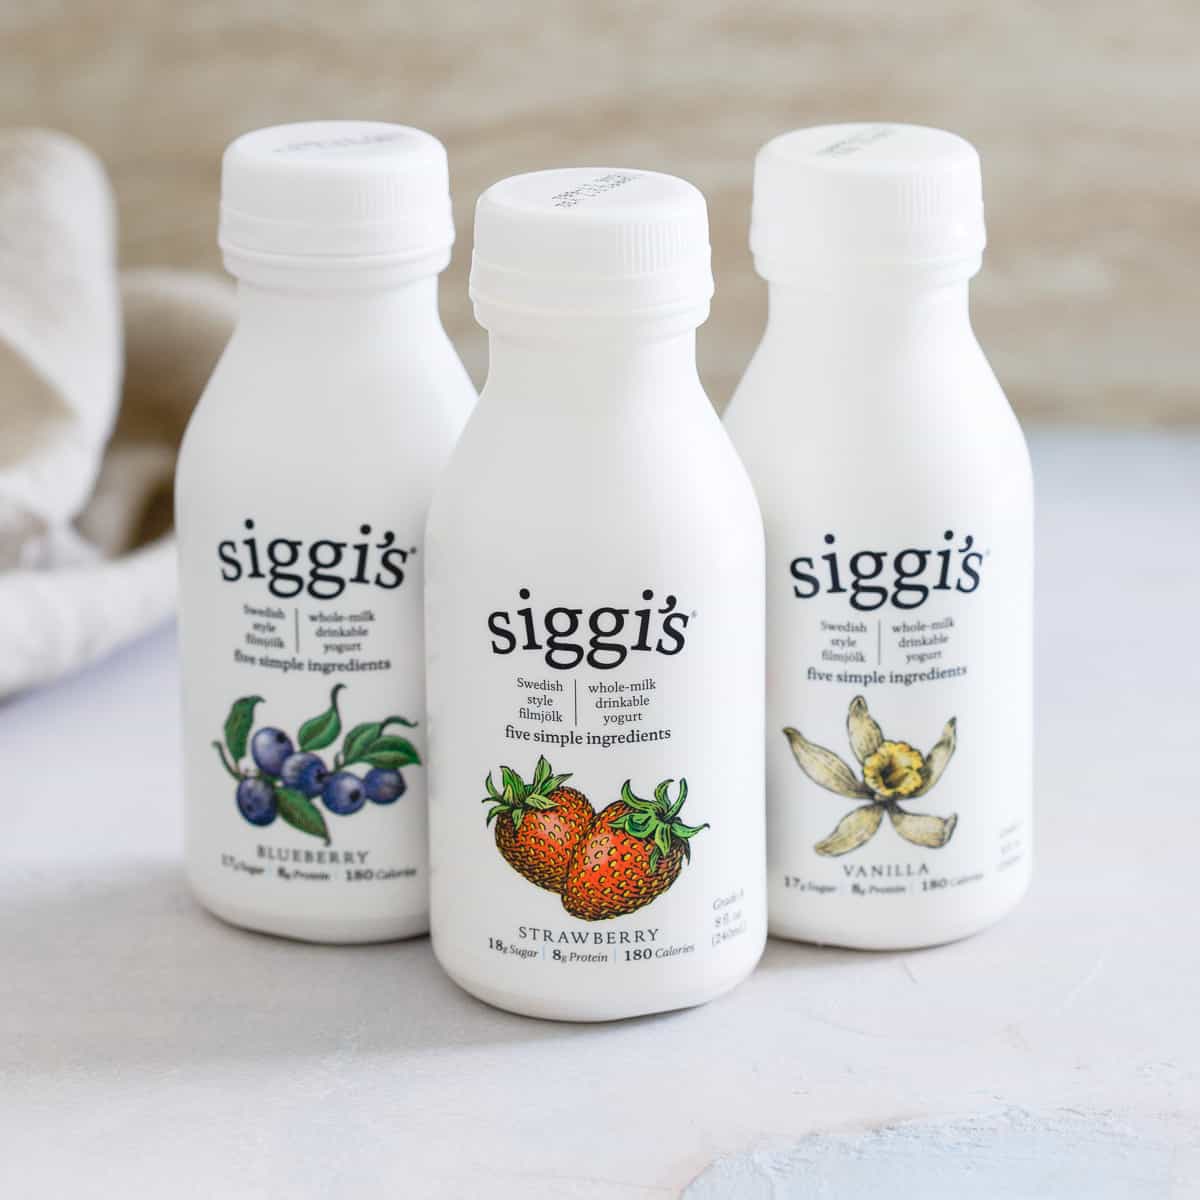 siggi's whole milk drinkable yogurt come in blueberry, strawberry and vanilla for a great healthy on-the-go option when you're rushed for breakfast.